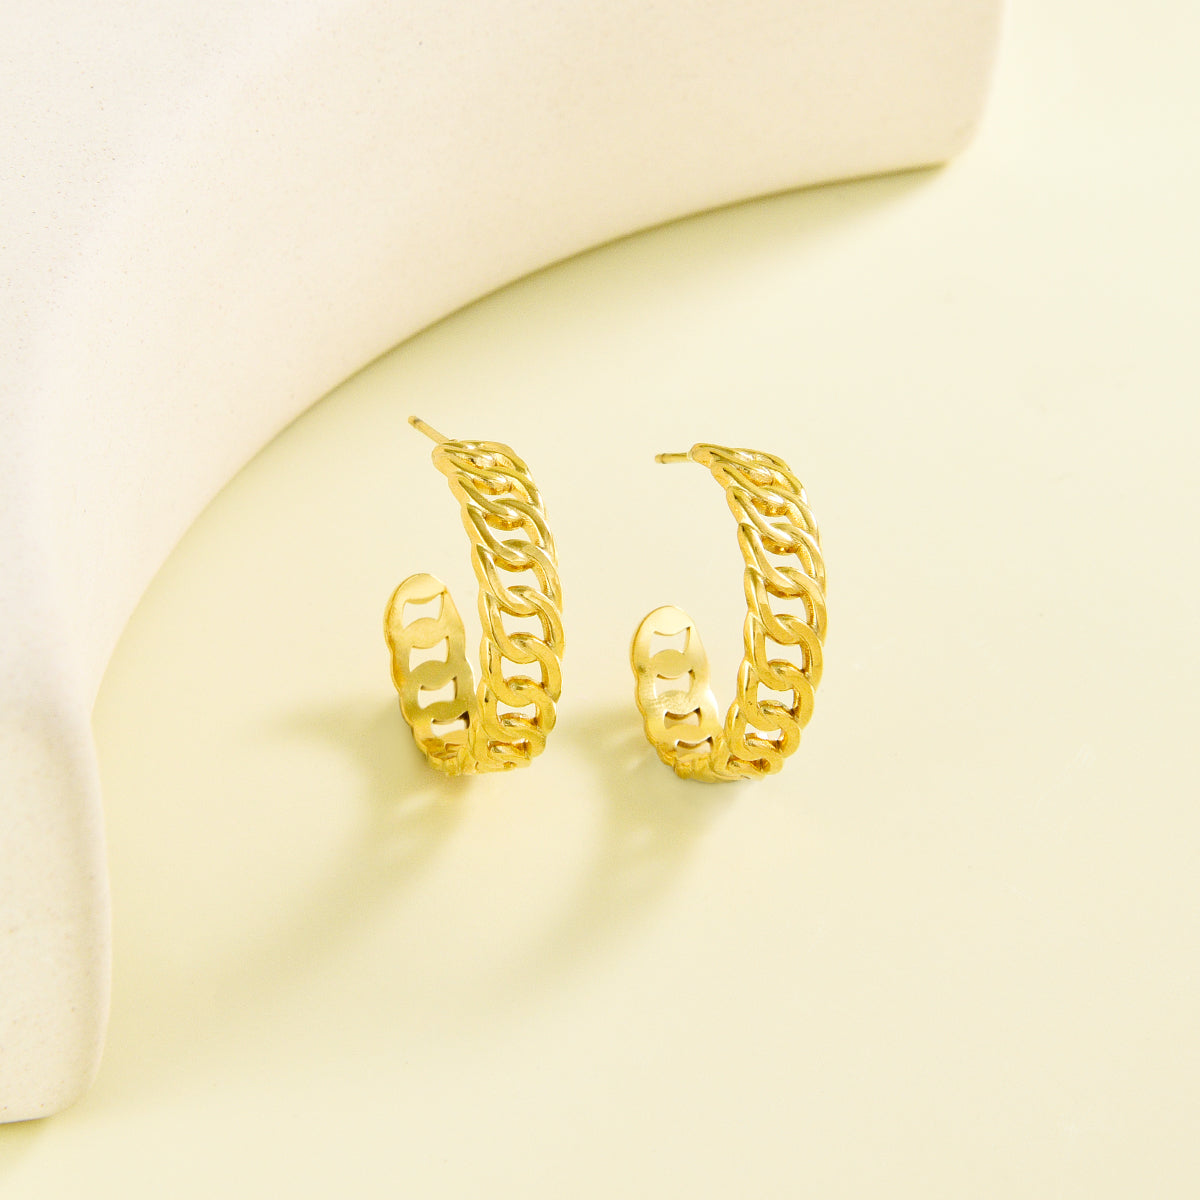 Small sized golden earrings with chain design